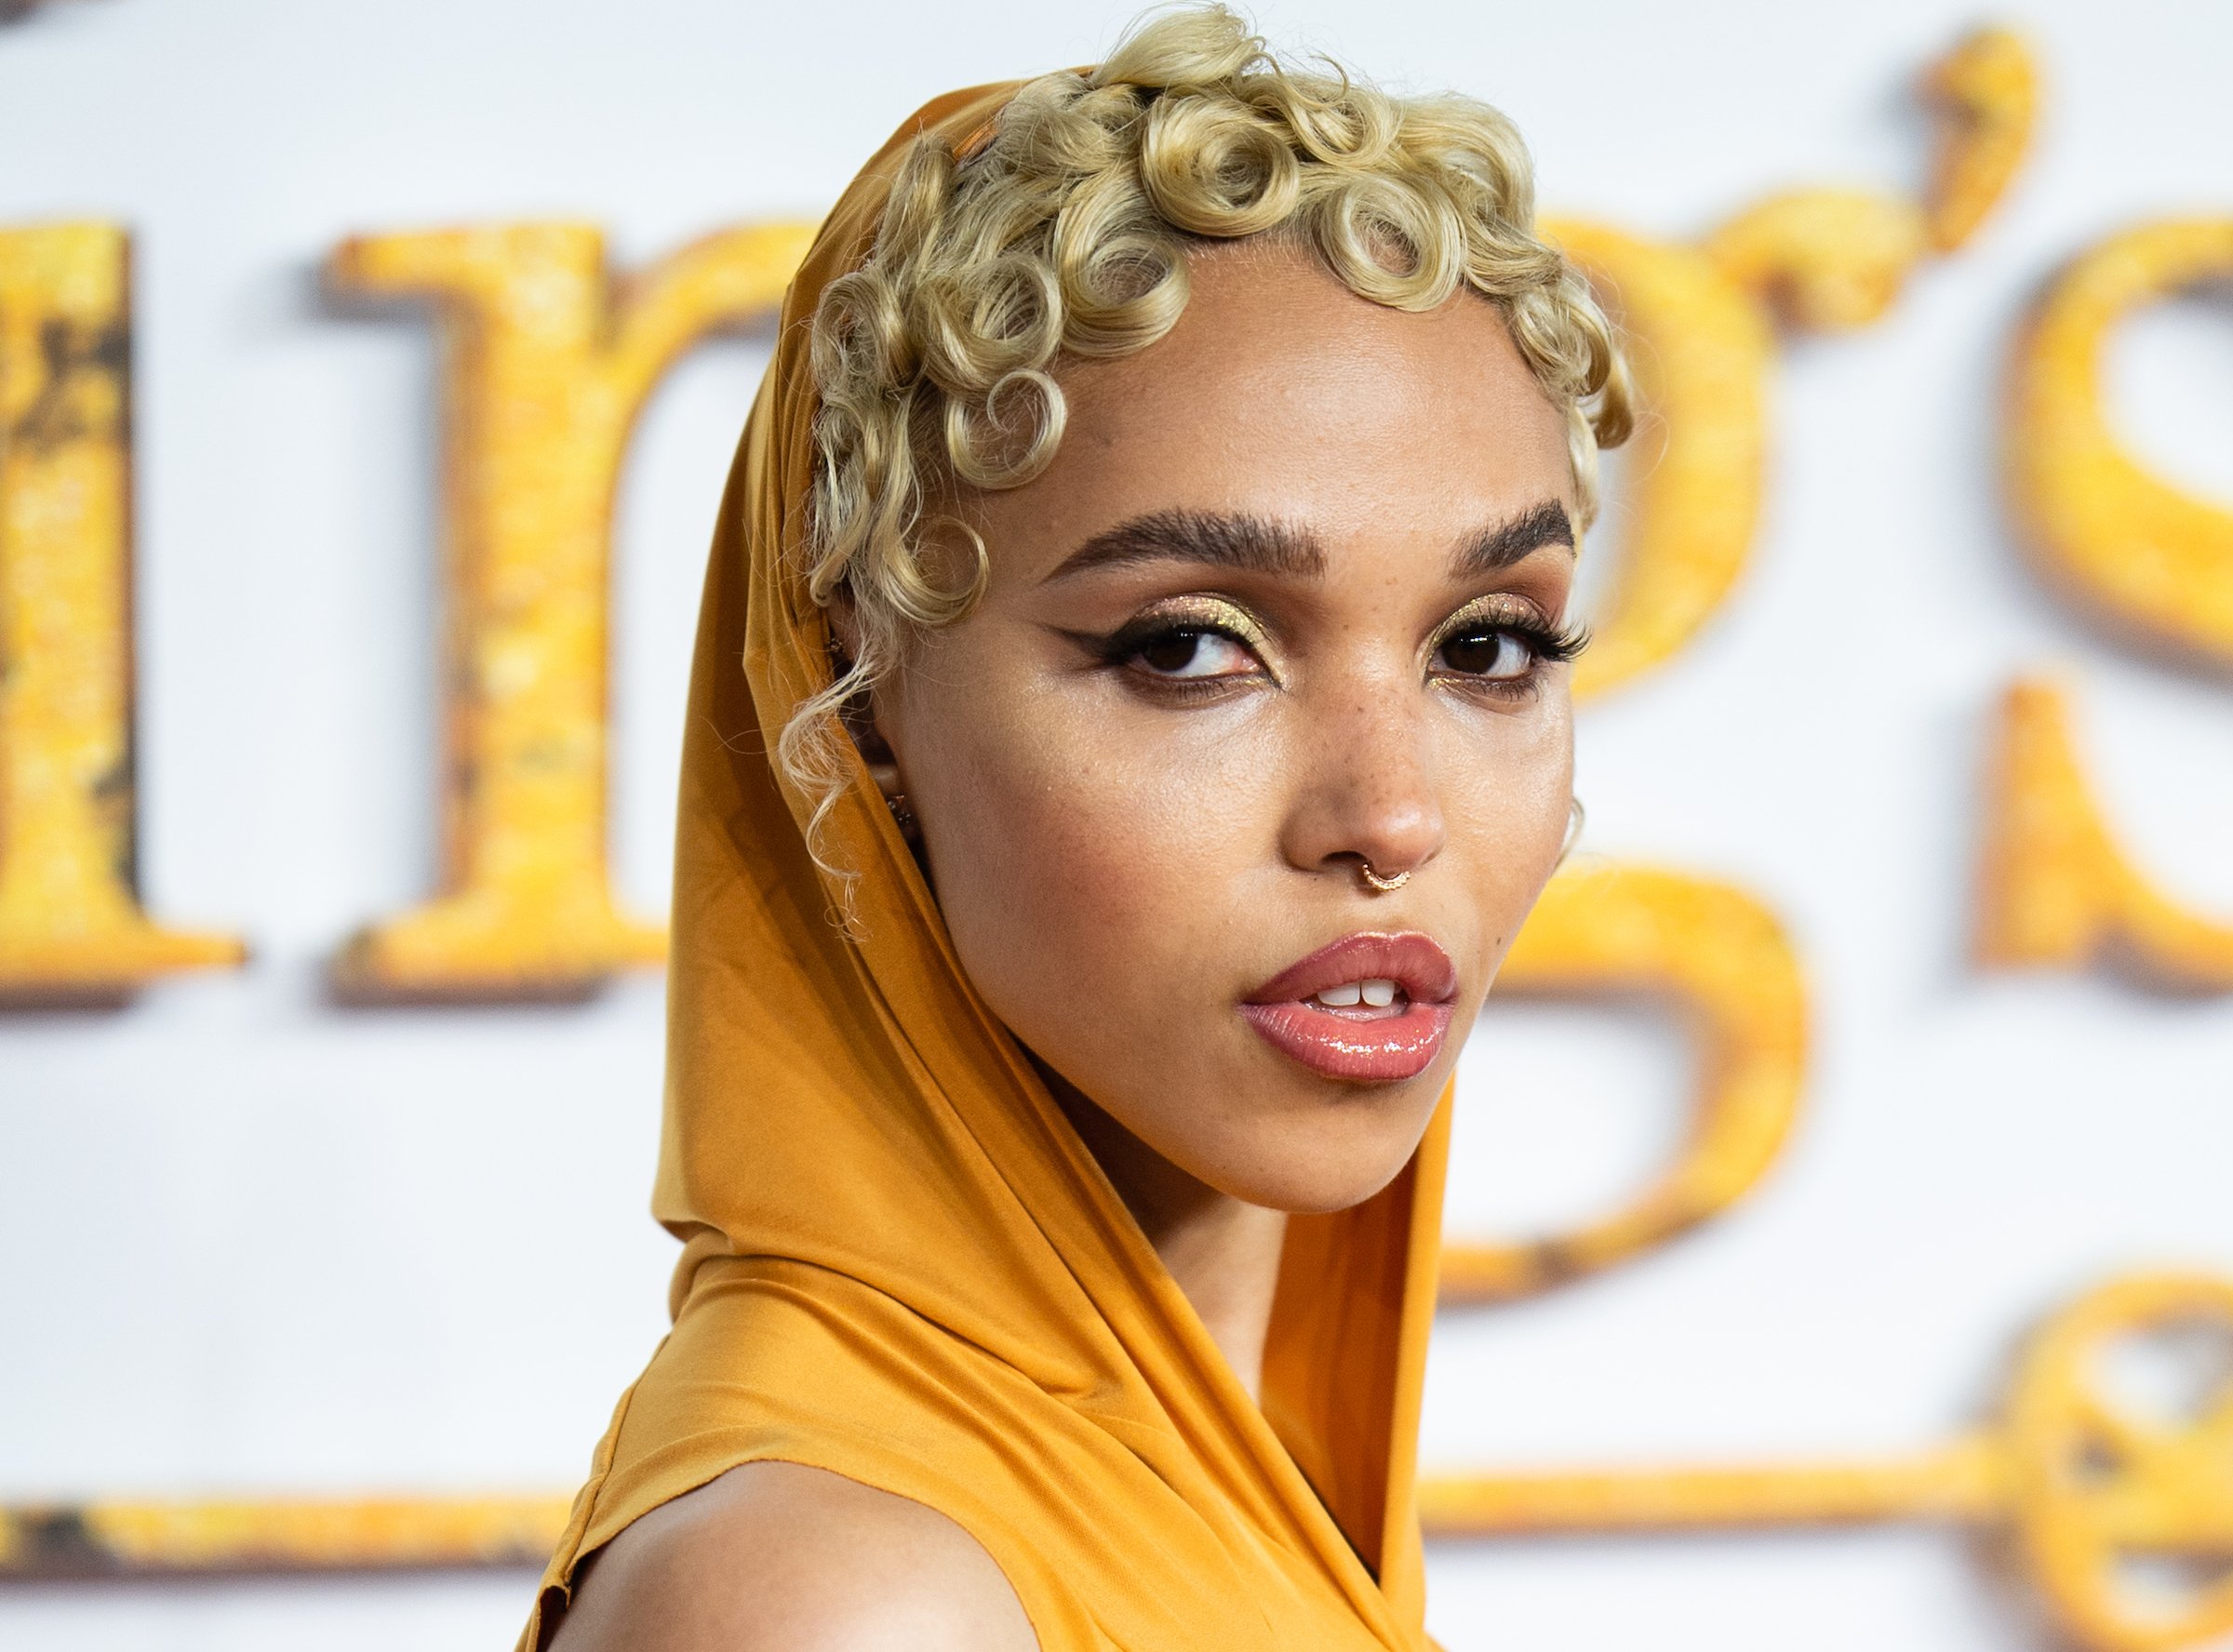 What Does 'FKA' in FKA Twigs' Name Stand For? (Hint: It's Not 'Formerly  Known As')